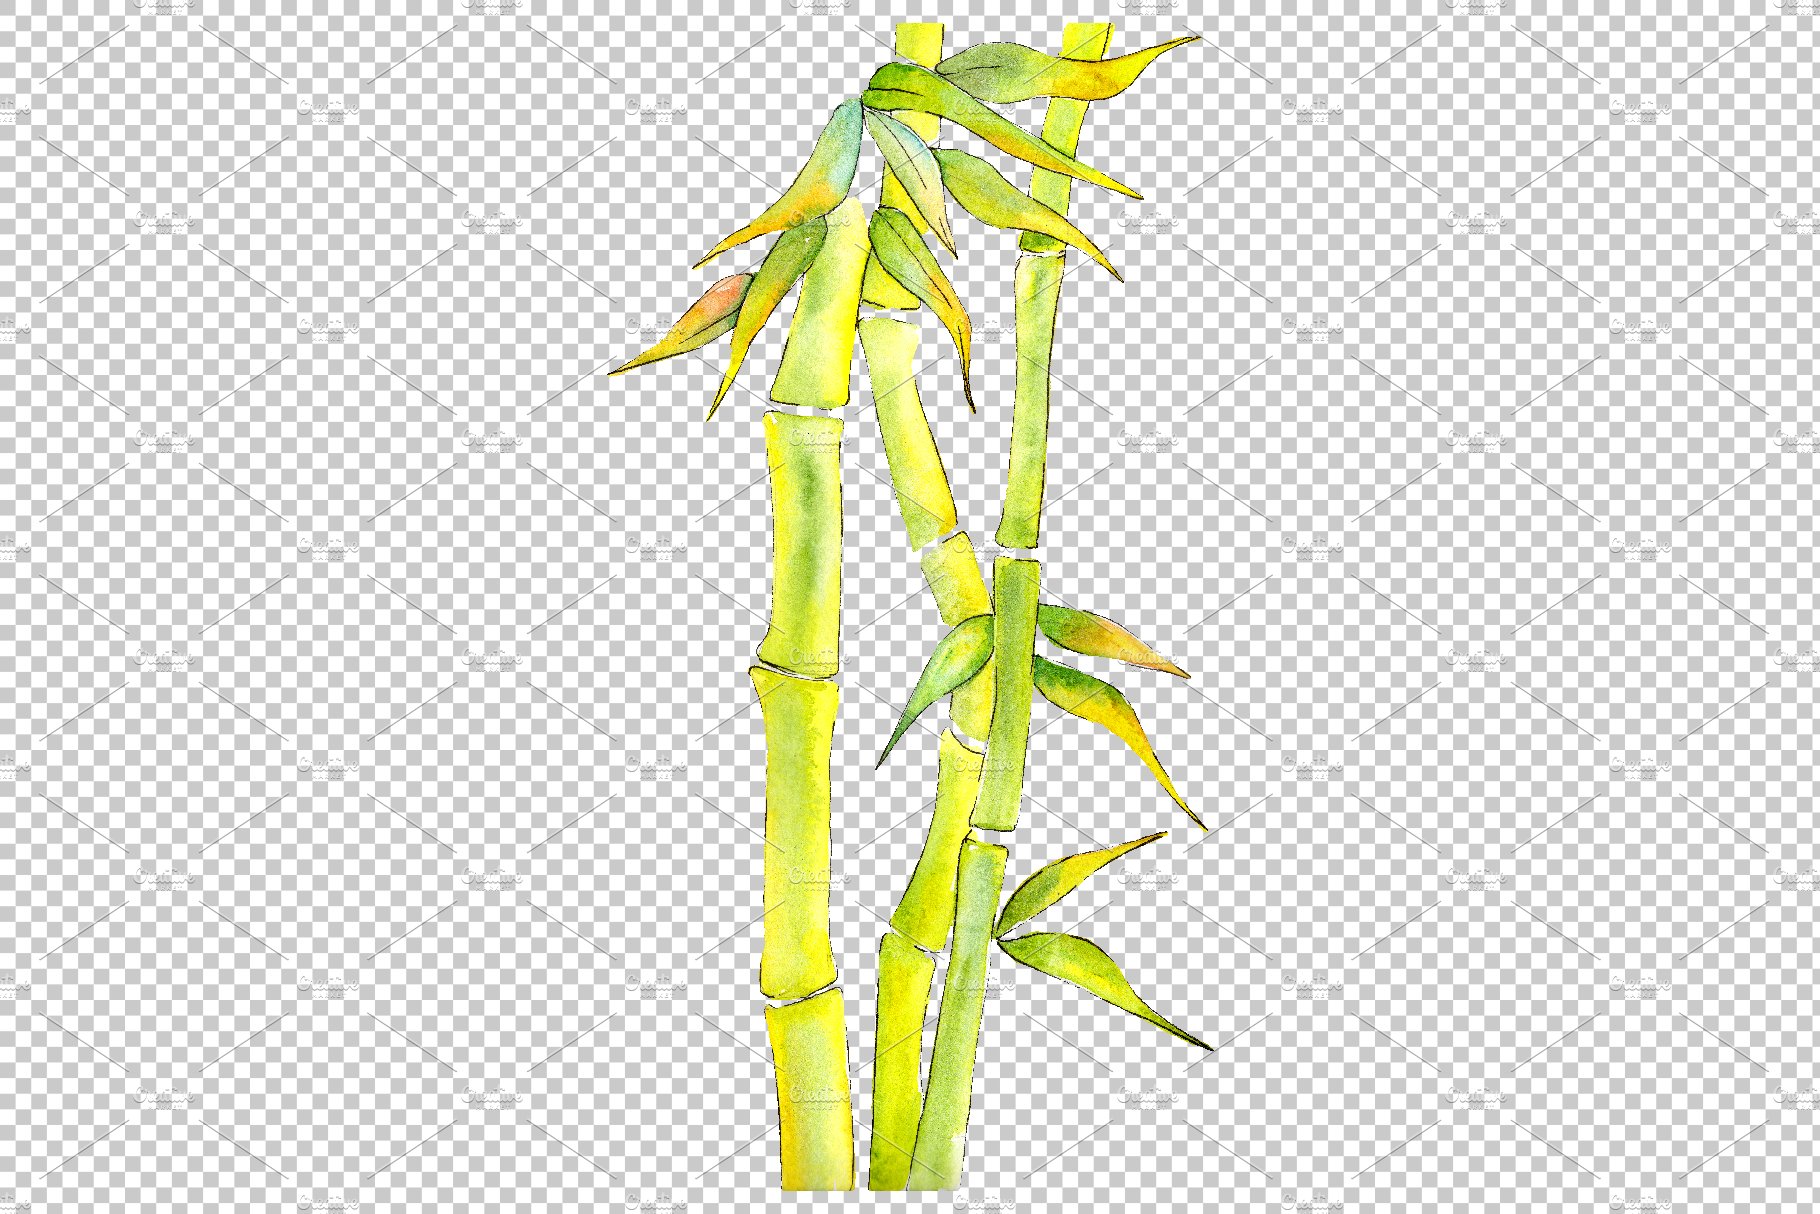 Watercolor painting of a bamboo plant.